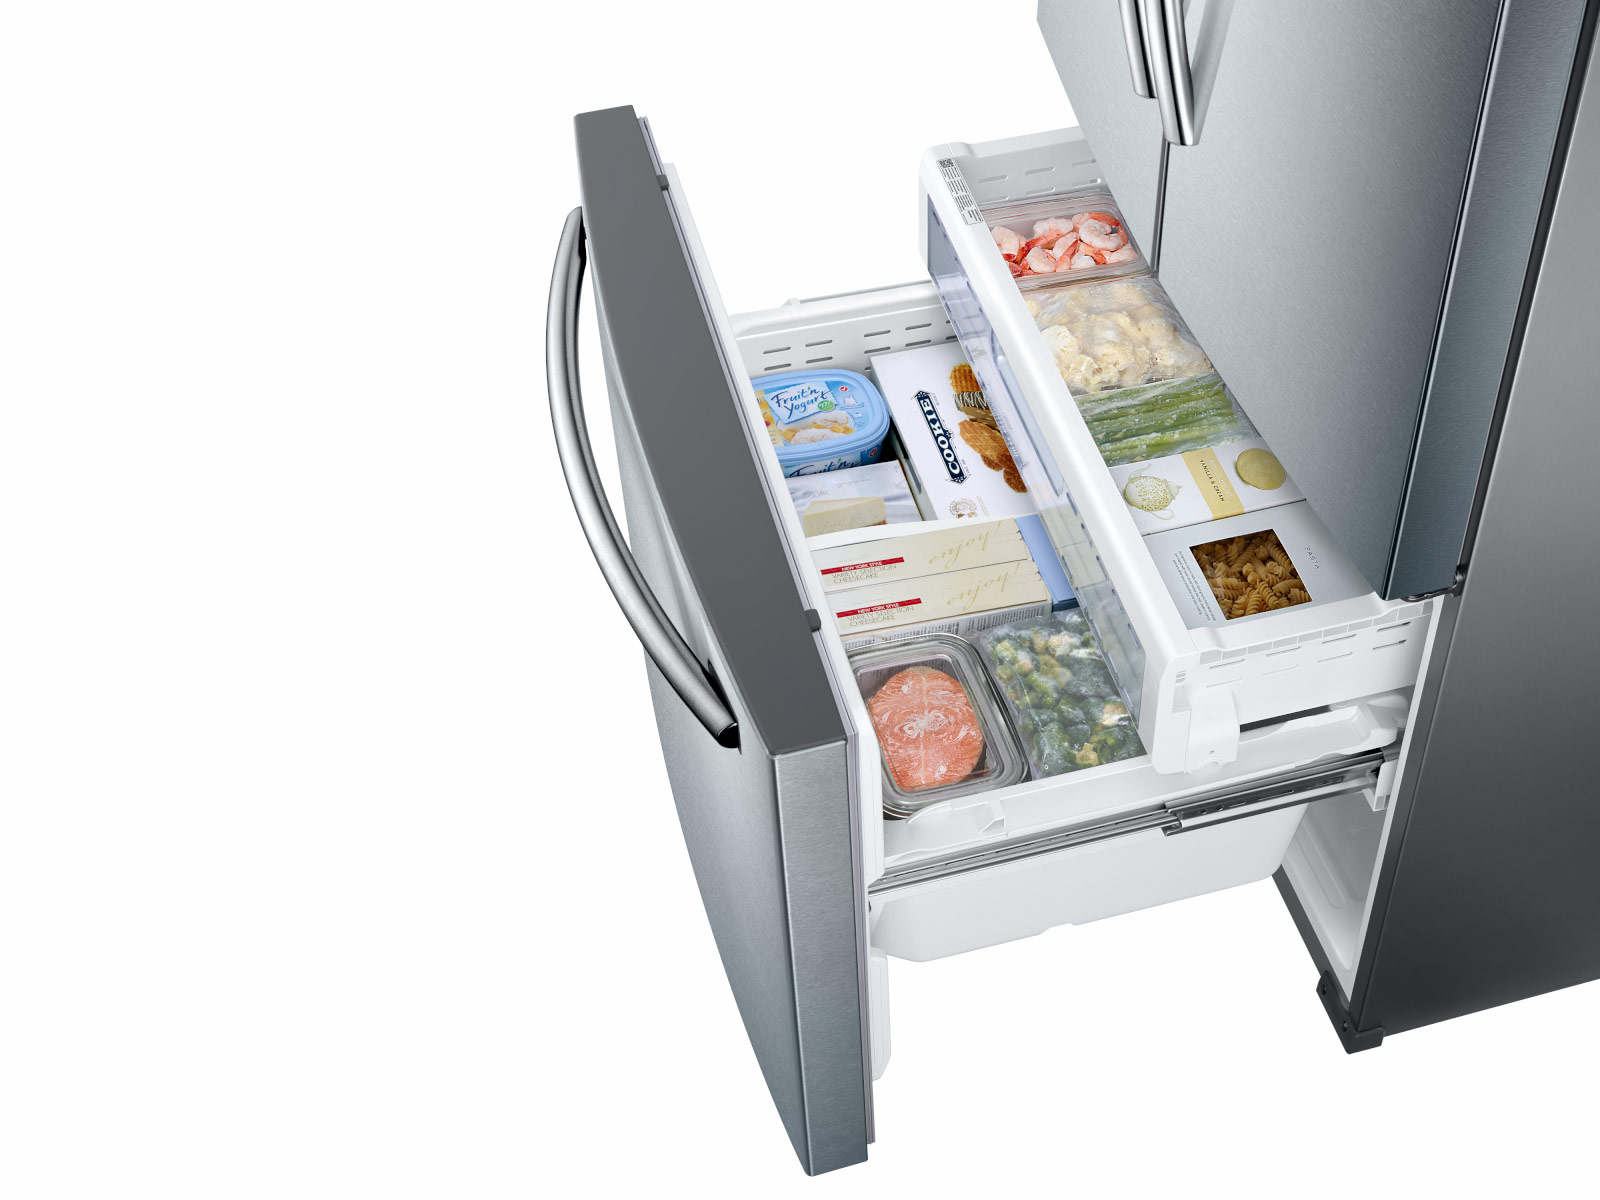 Thumbnail image of 26 cu. ft. 3-Door French Door Refrigerator with CoolSelect Pantry™ in Stainless Steel